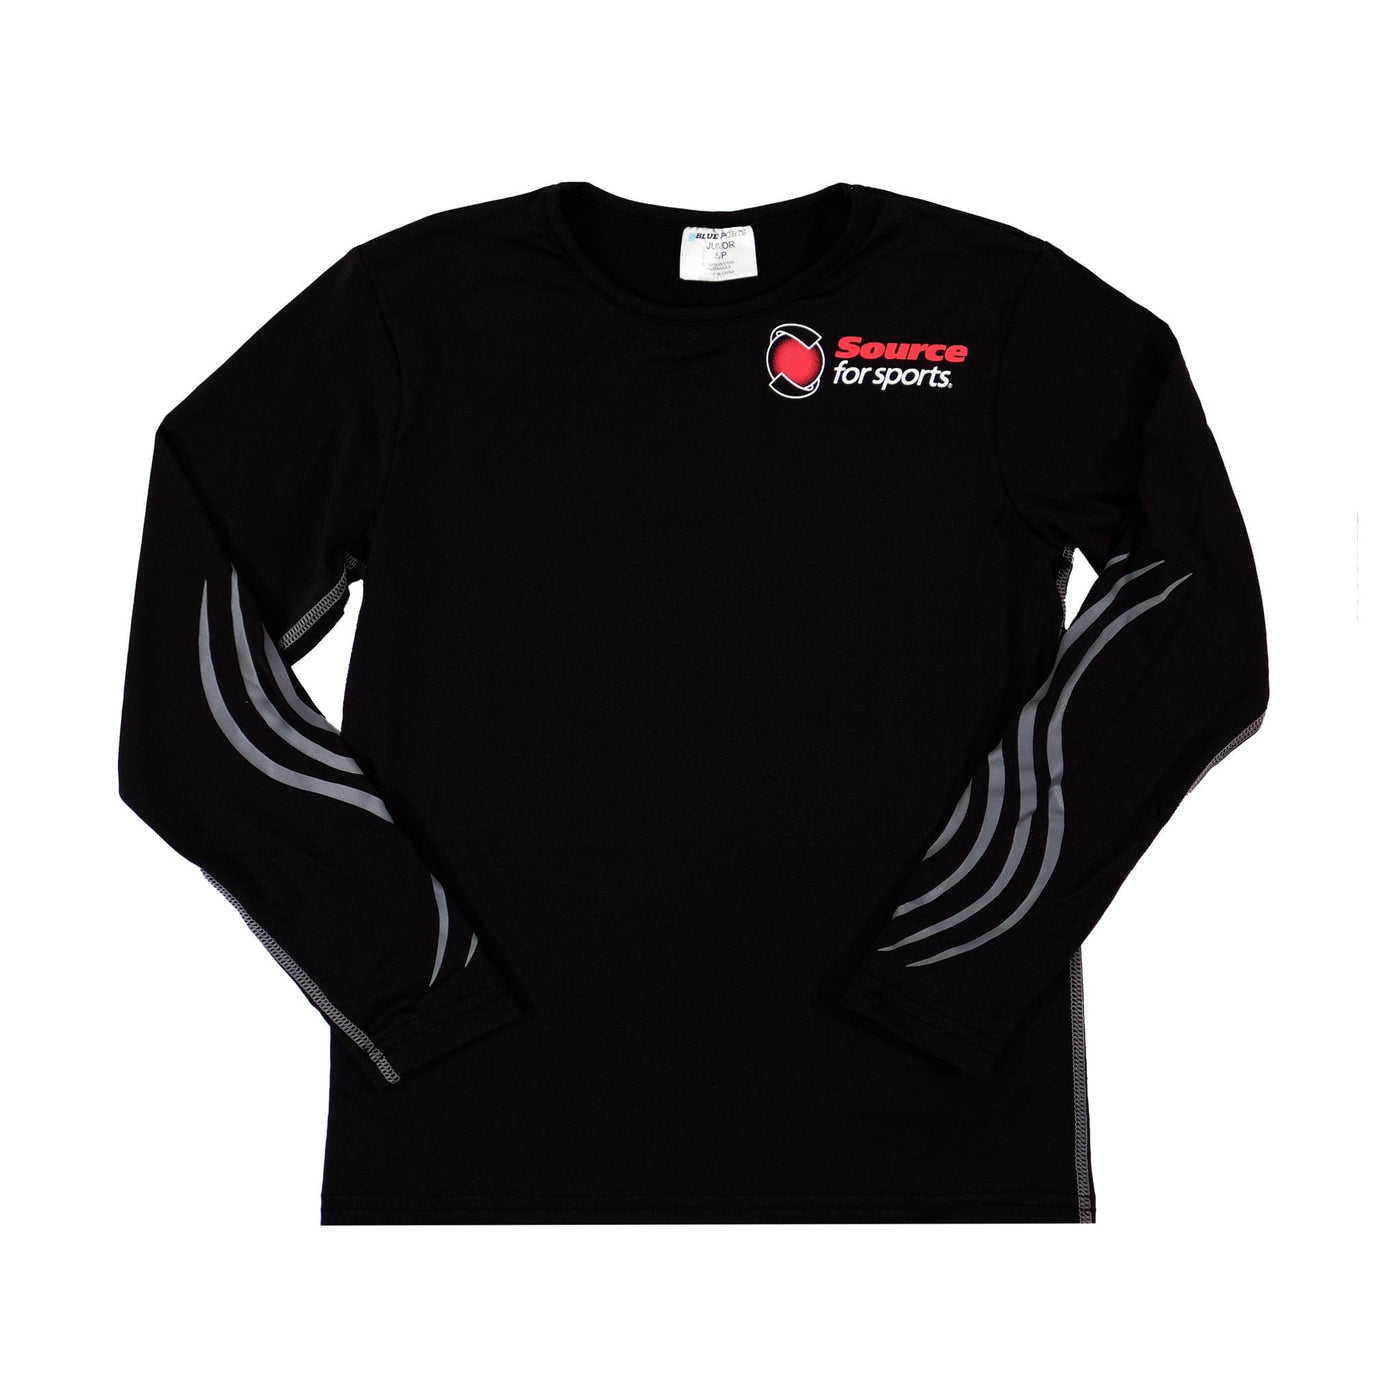 Blue Sports Compression Long Sleeve Youth Shirt - The Hockey Shop Source For Sports